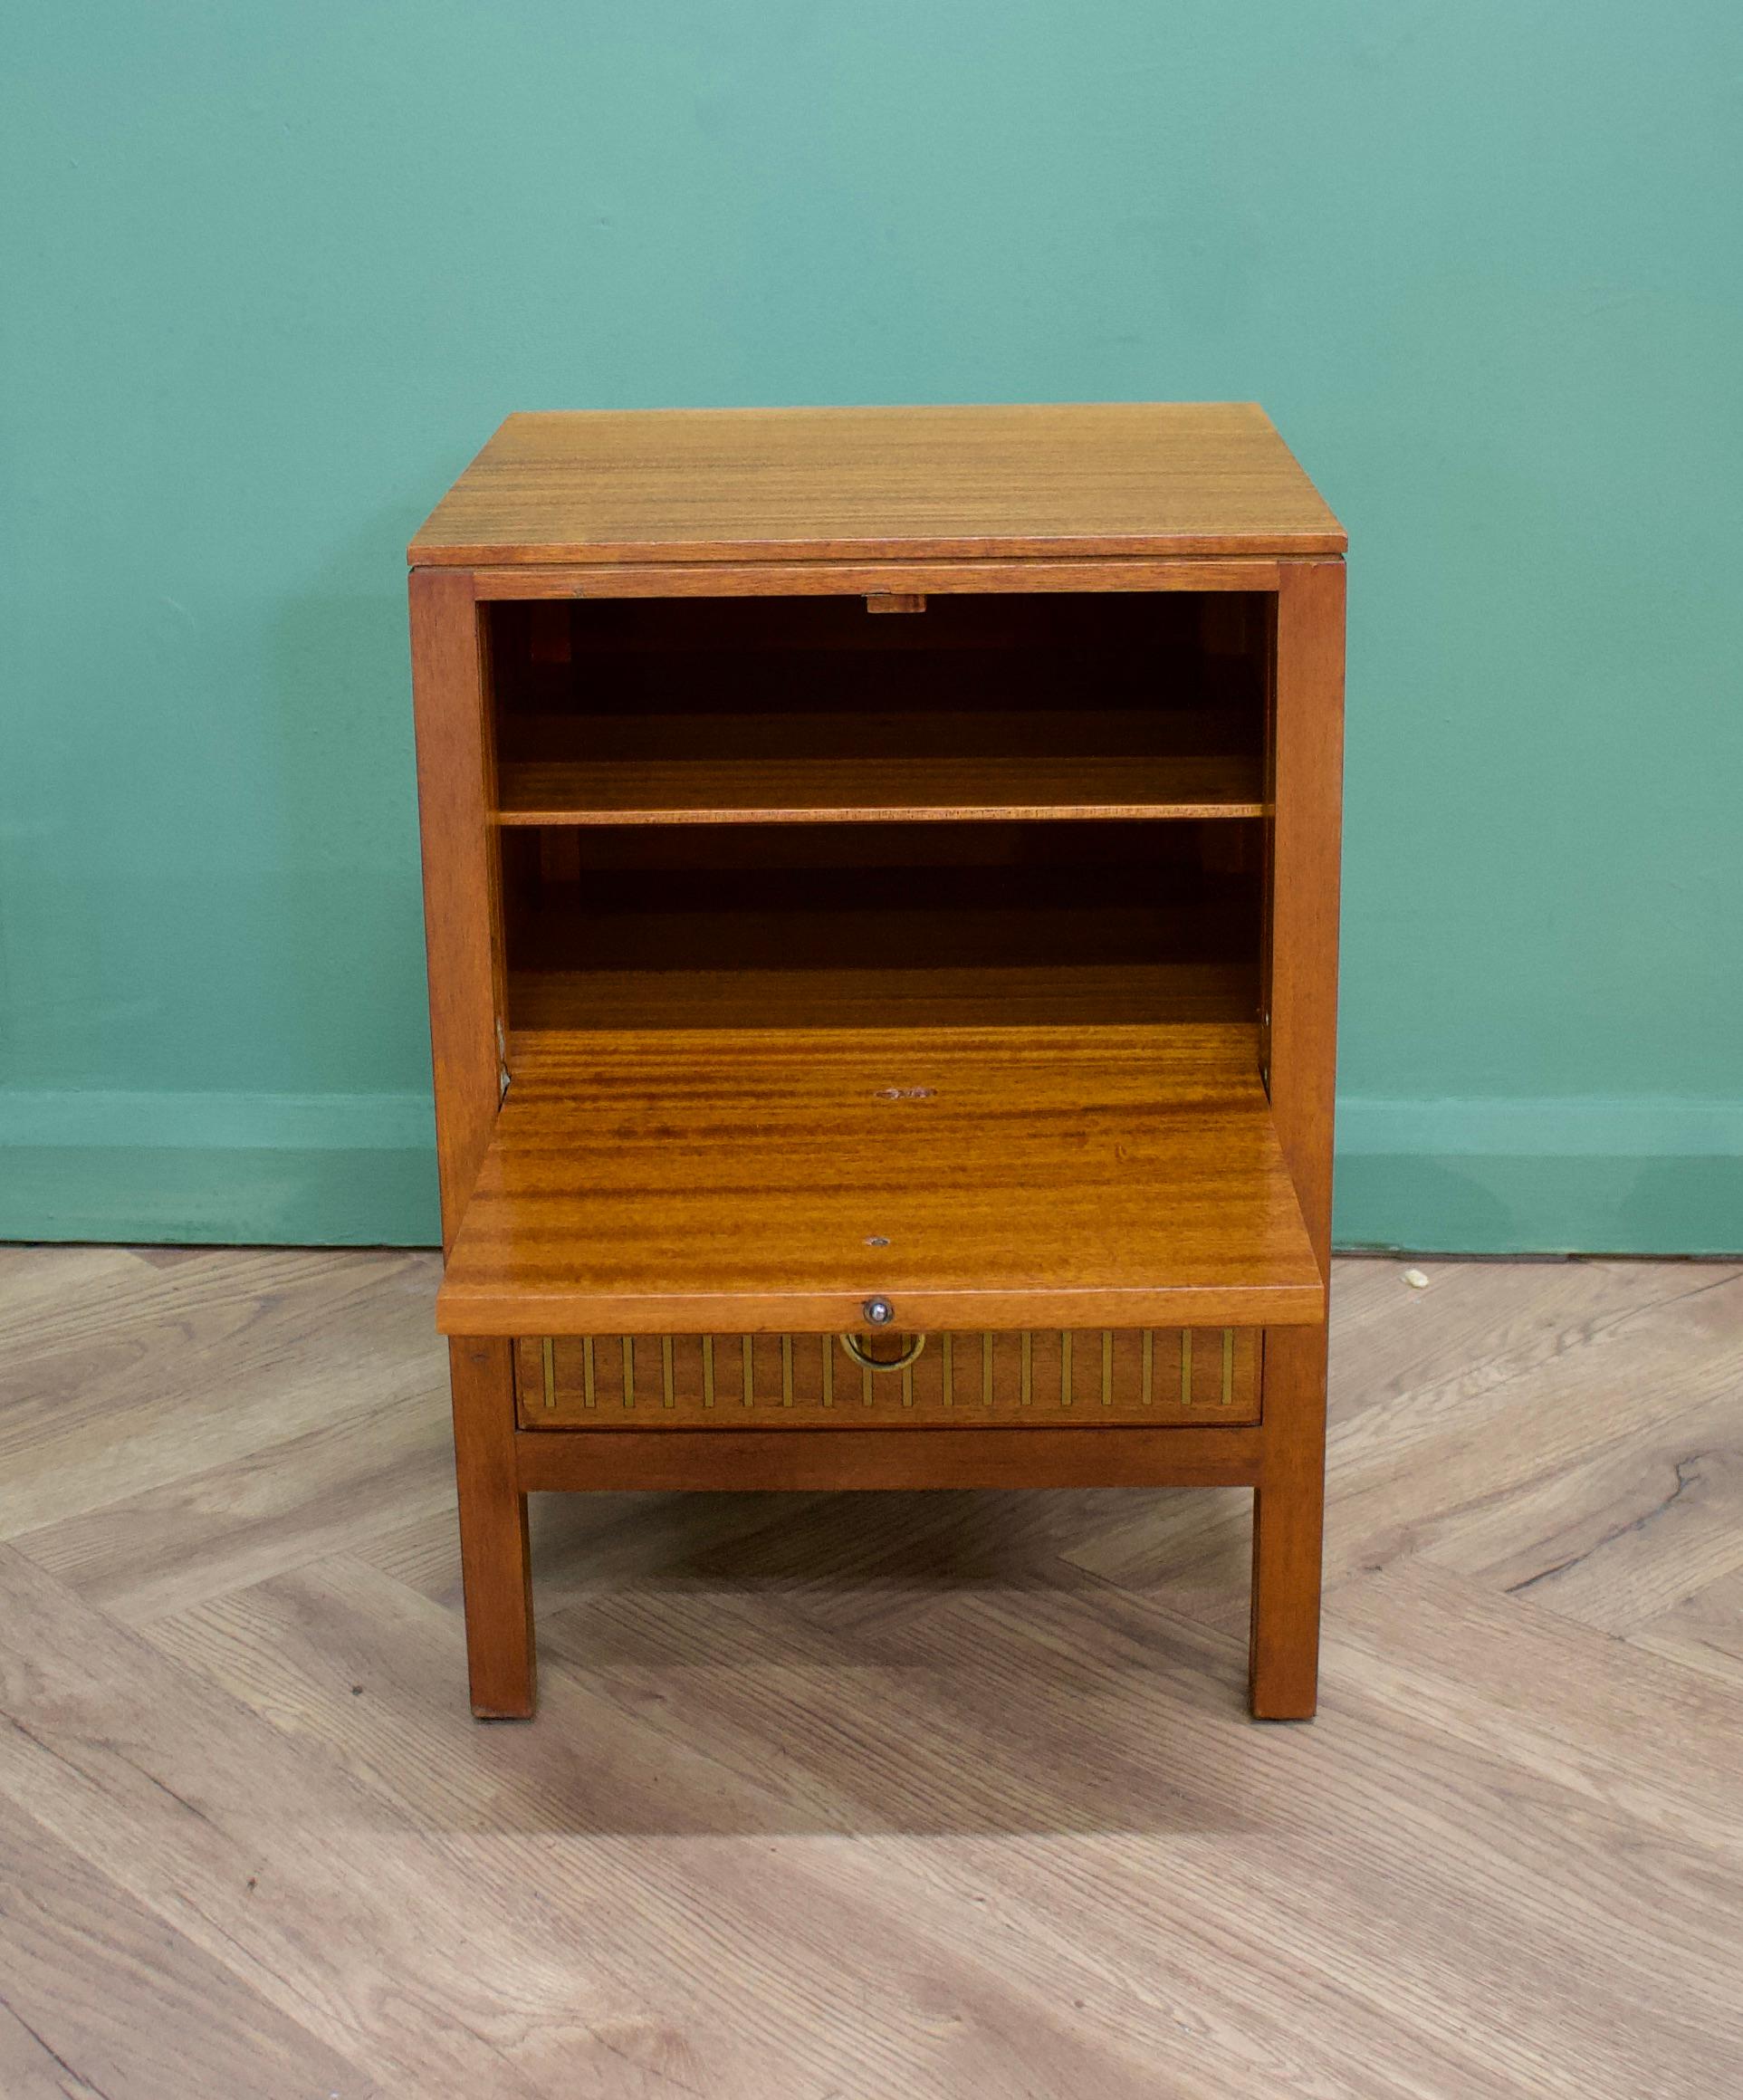 20th Century Mid-Century Teak Bedside Tables from Loughborough, 1950s